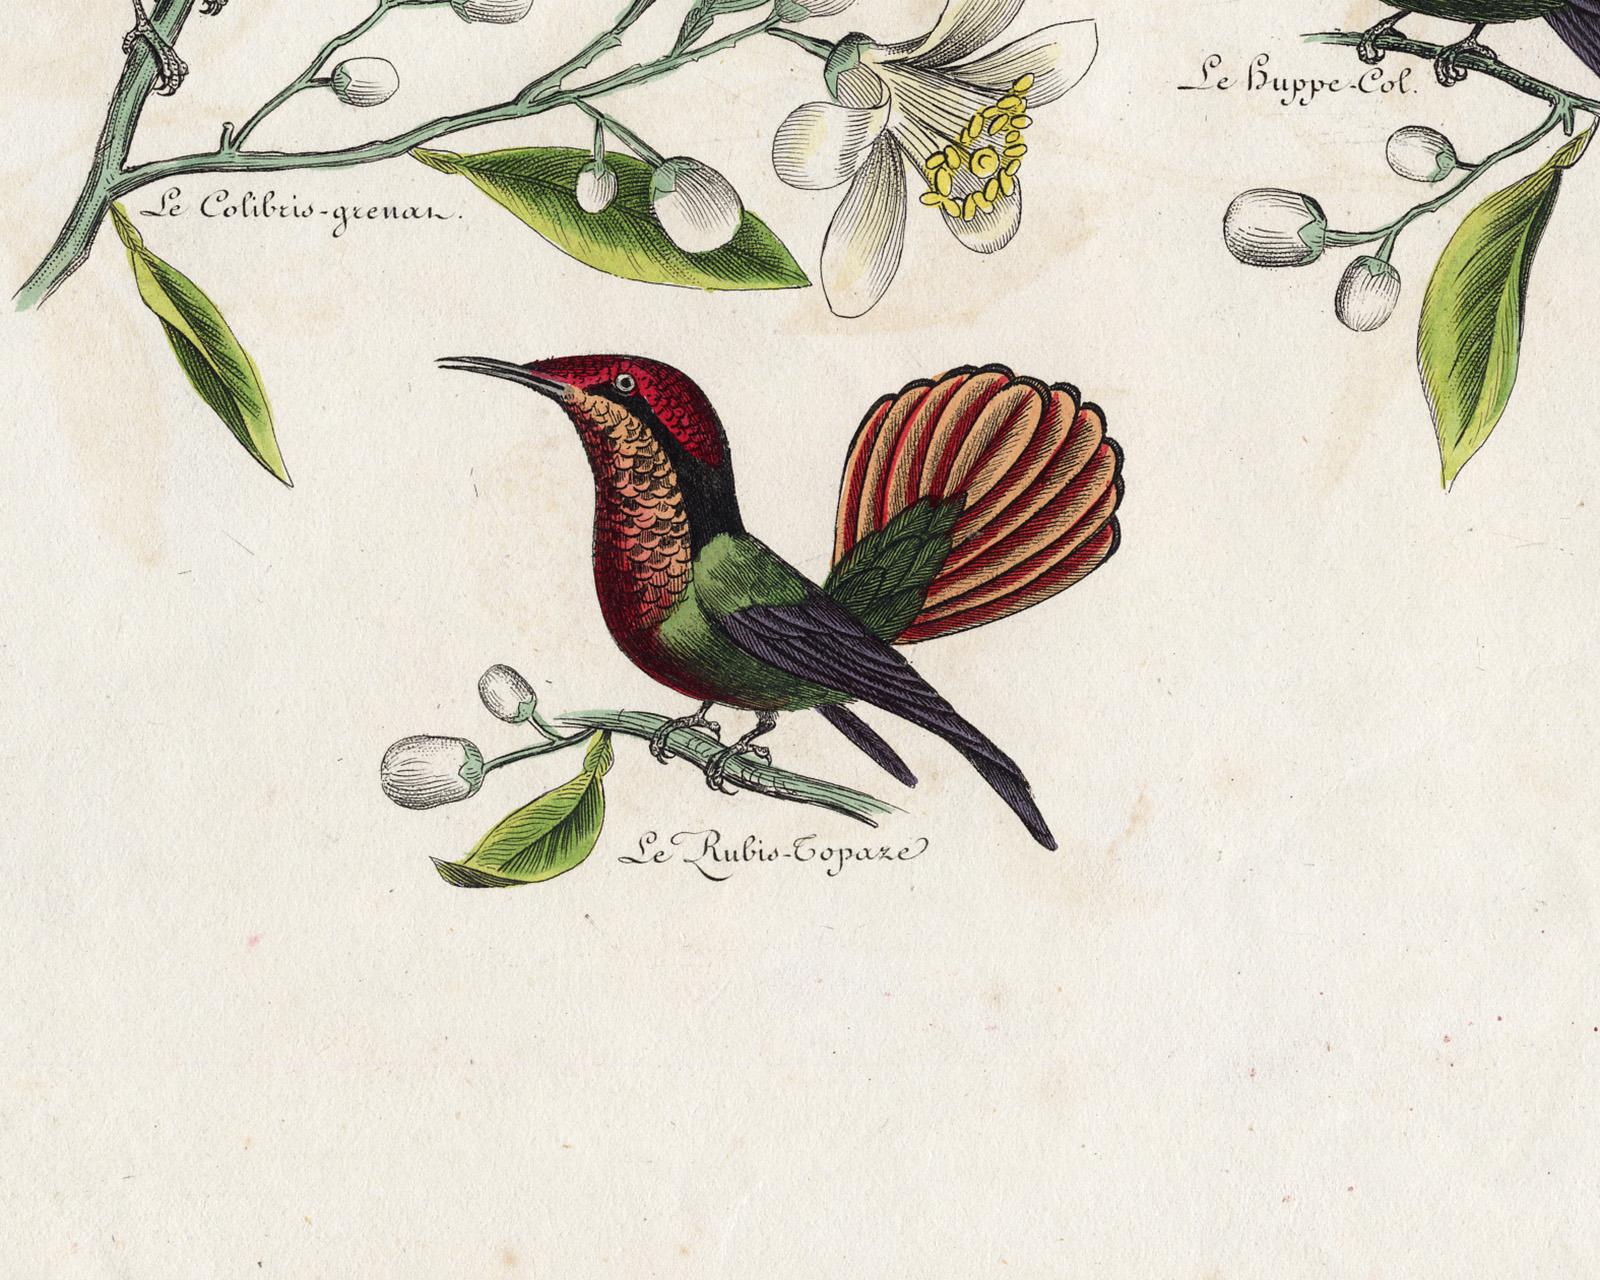 Subject: Plate 2: Le Colibris Grenat - Le Huppe-Col - Le Rubis Topaze.' (Garnet Throated Hummingbird - Crested Green Hummingbird - Ruby Topaz Hummingbird.) The second plate is actually a unique proof print before lettering, additional engraving /